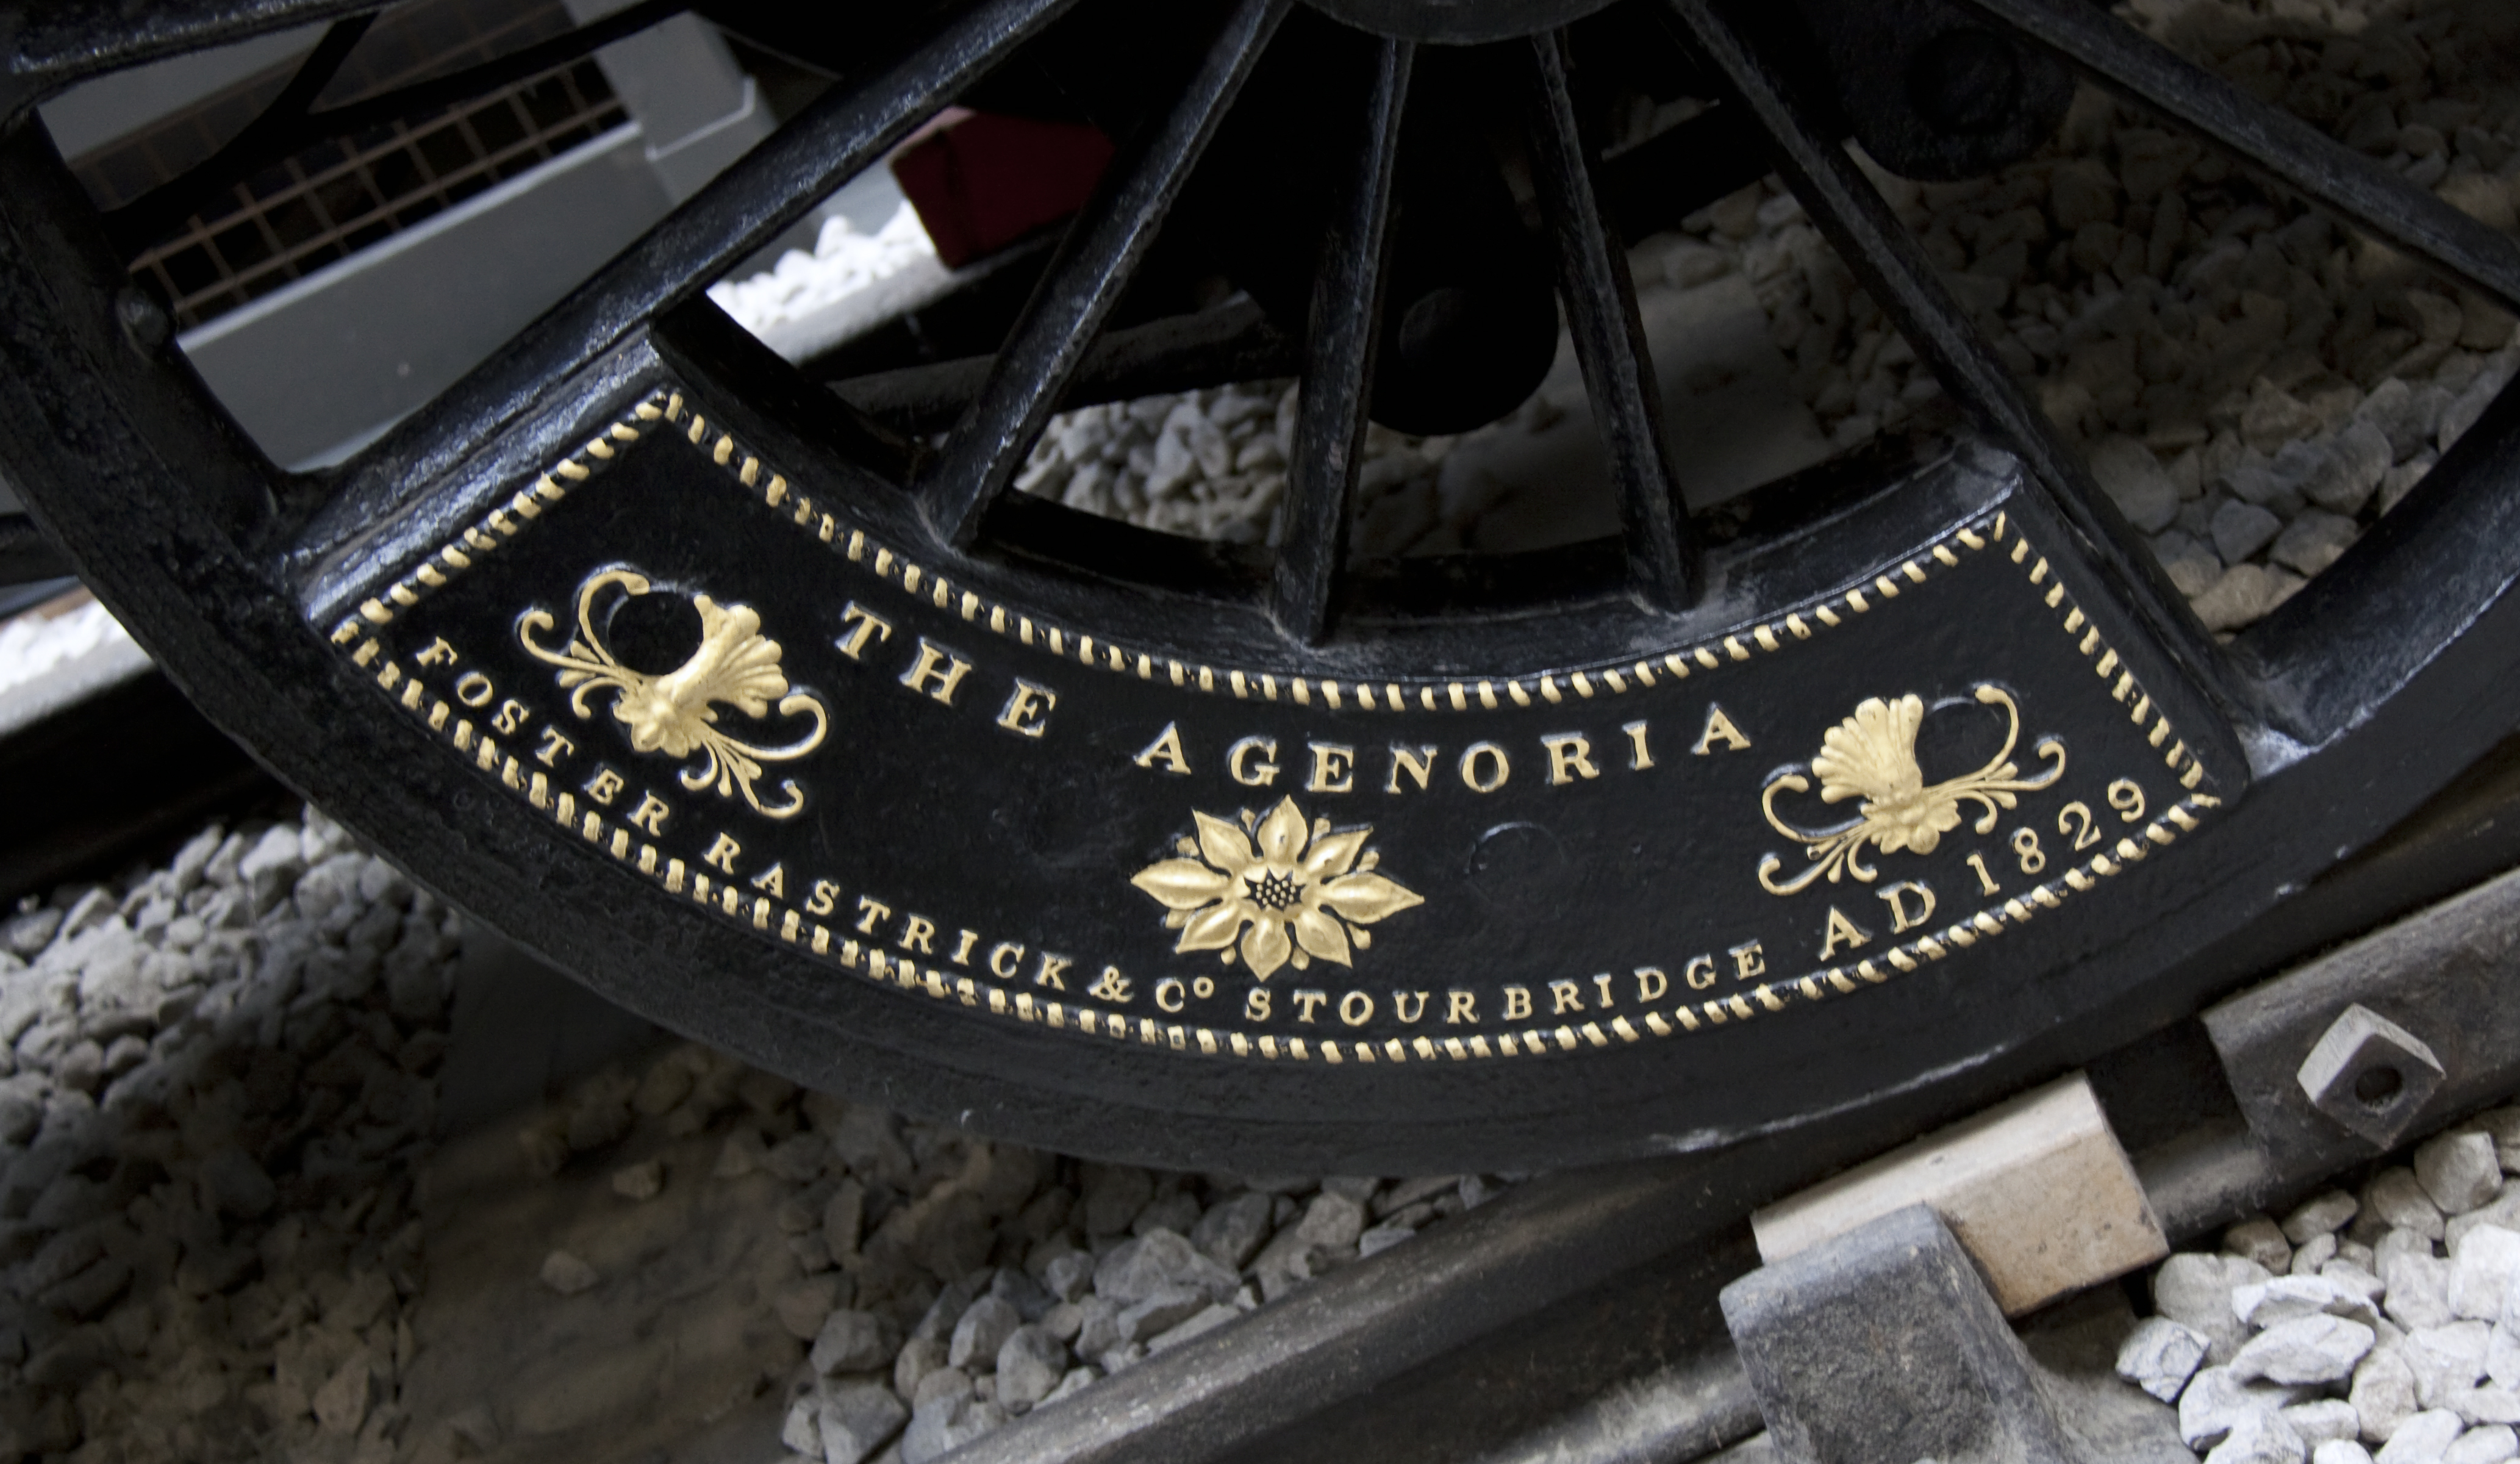 Detail of decorative wheel balance weight from “The Agenoria’. (1884-92)